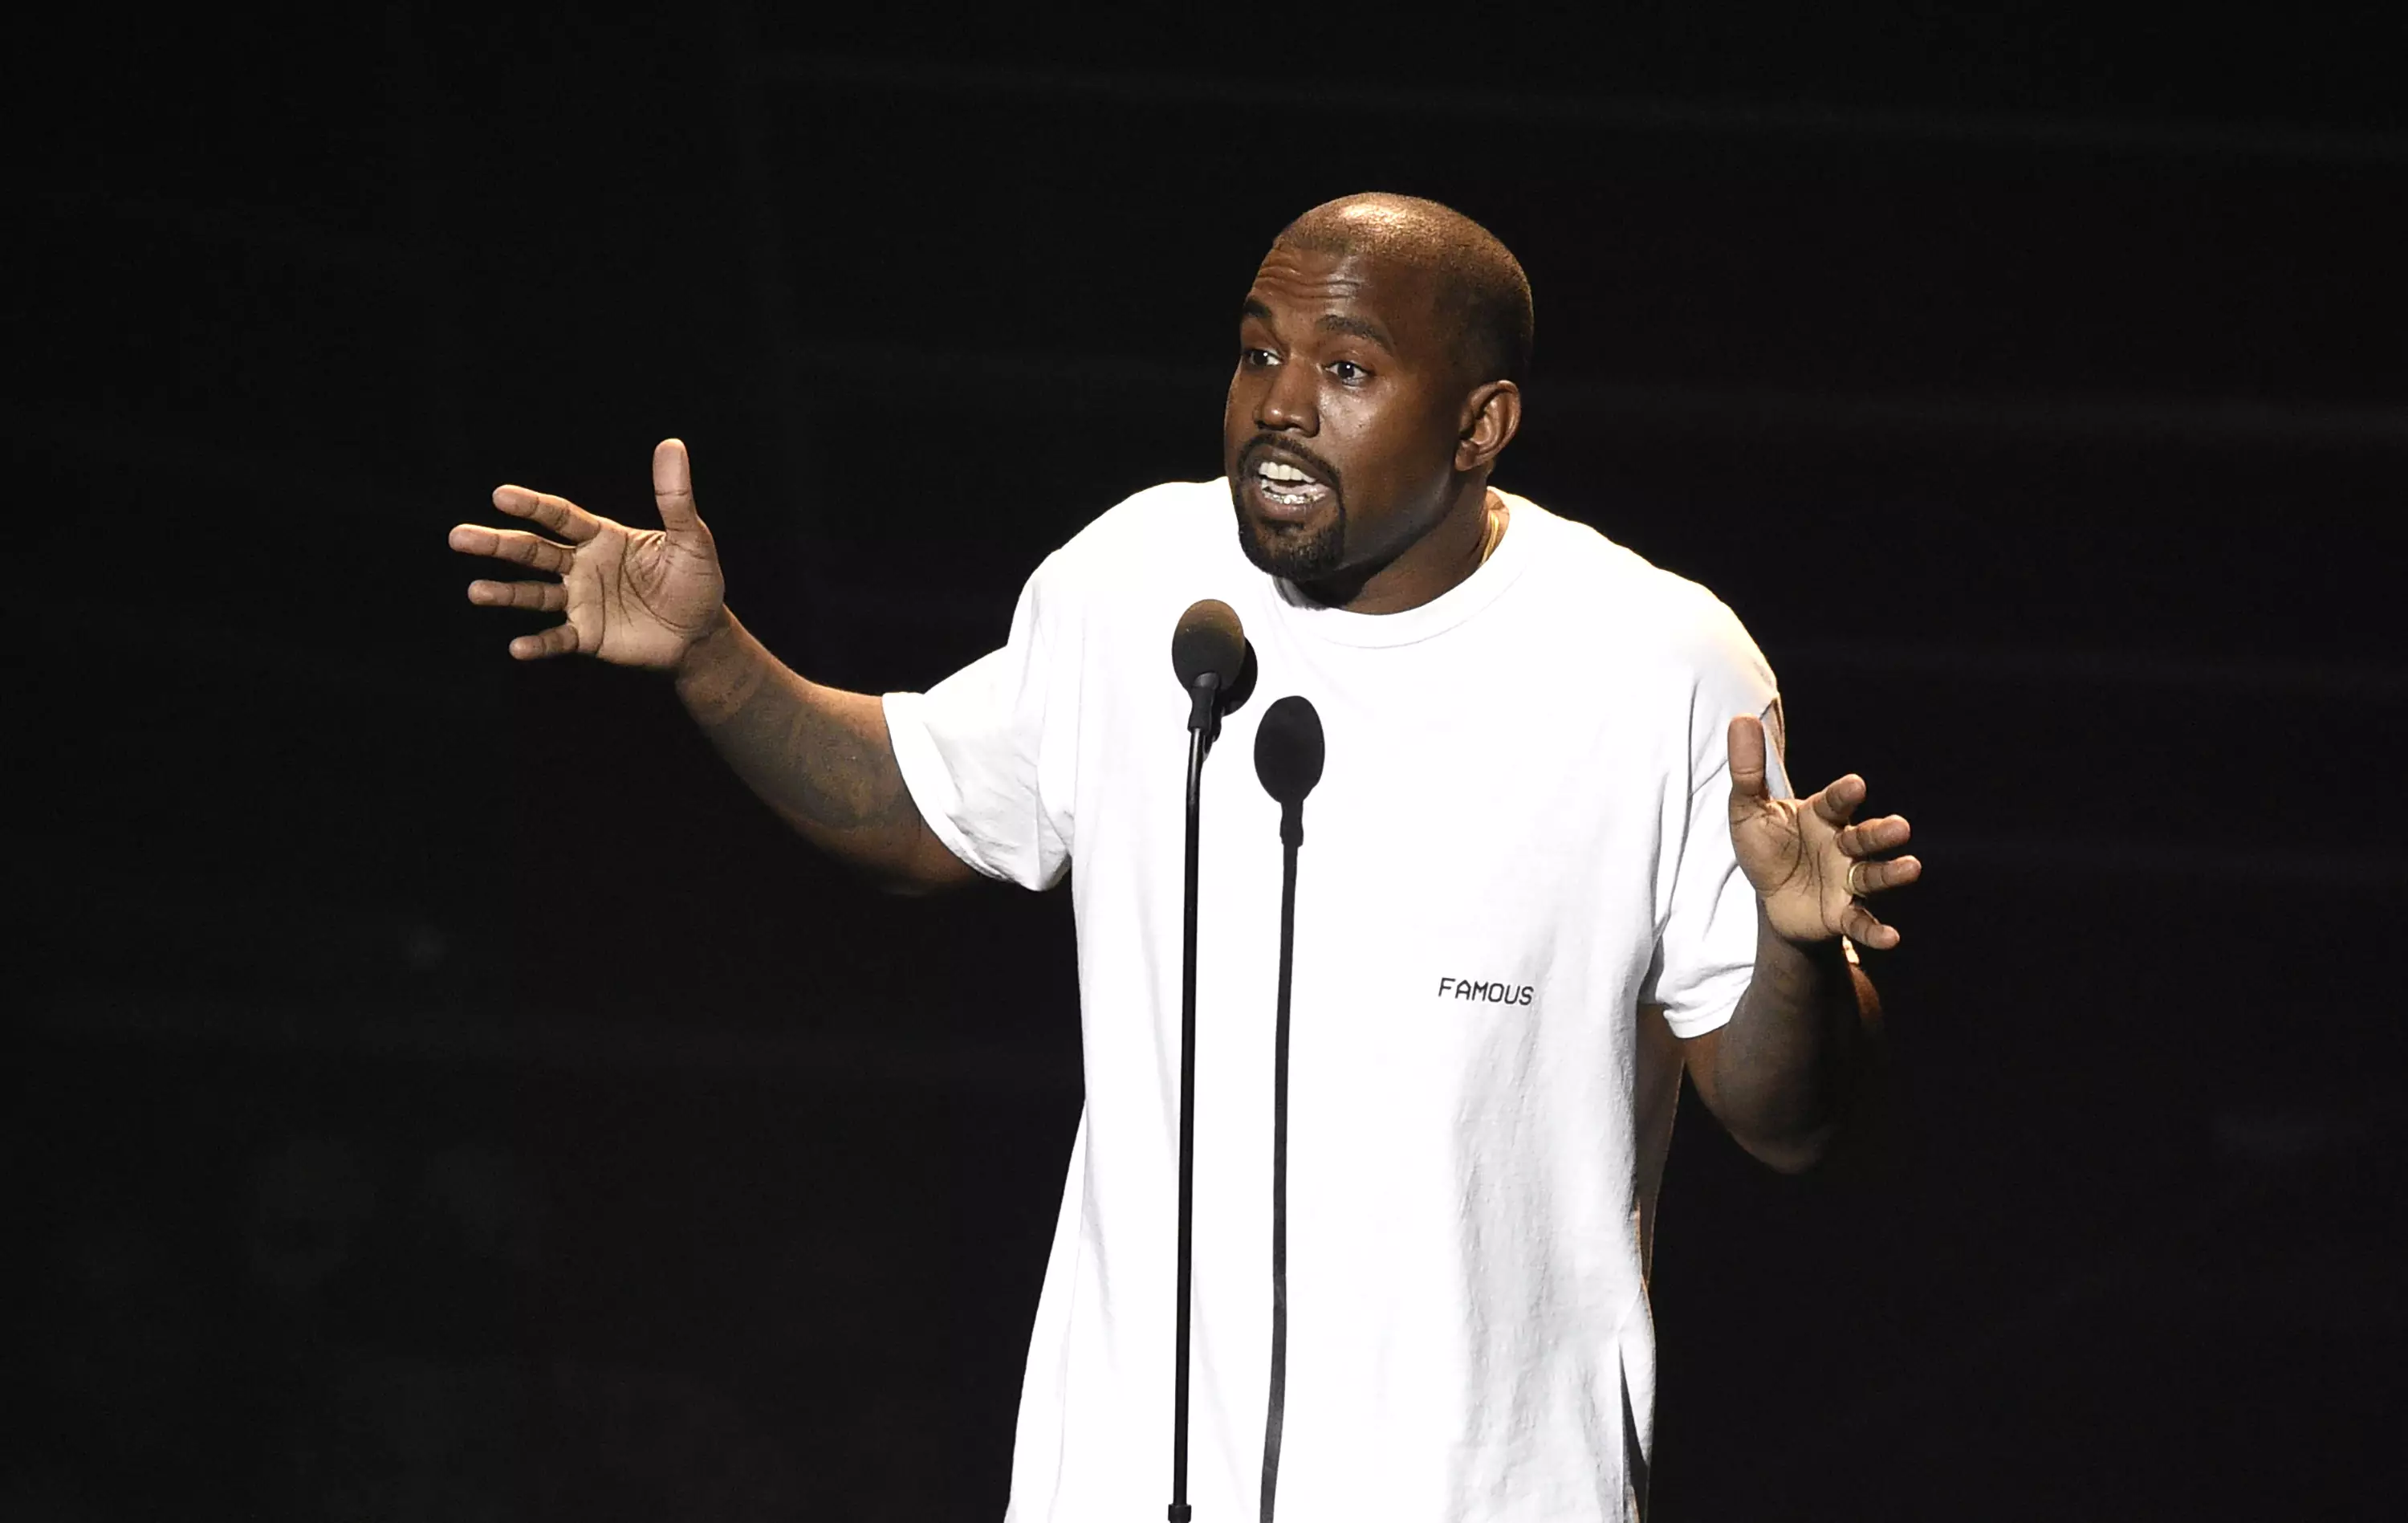 Kanye West Ignites 2020 Presidential Campaign In Mid-Concert Speech